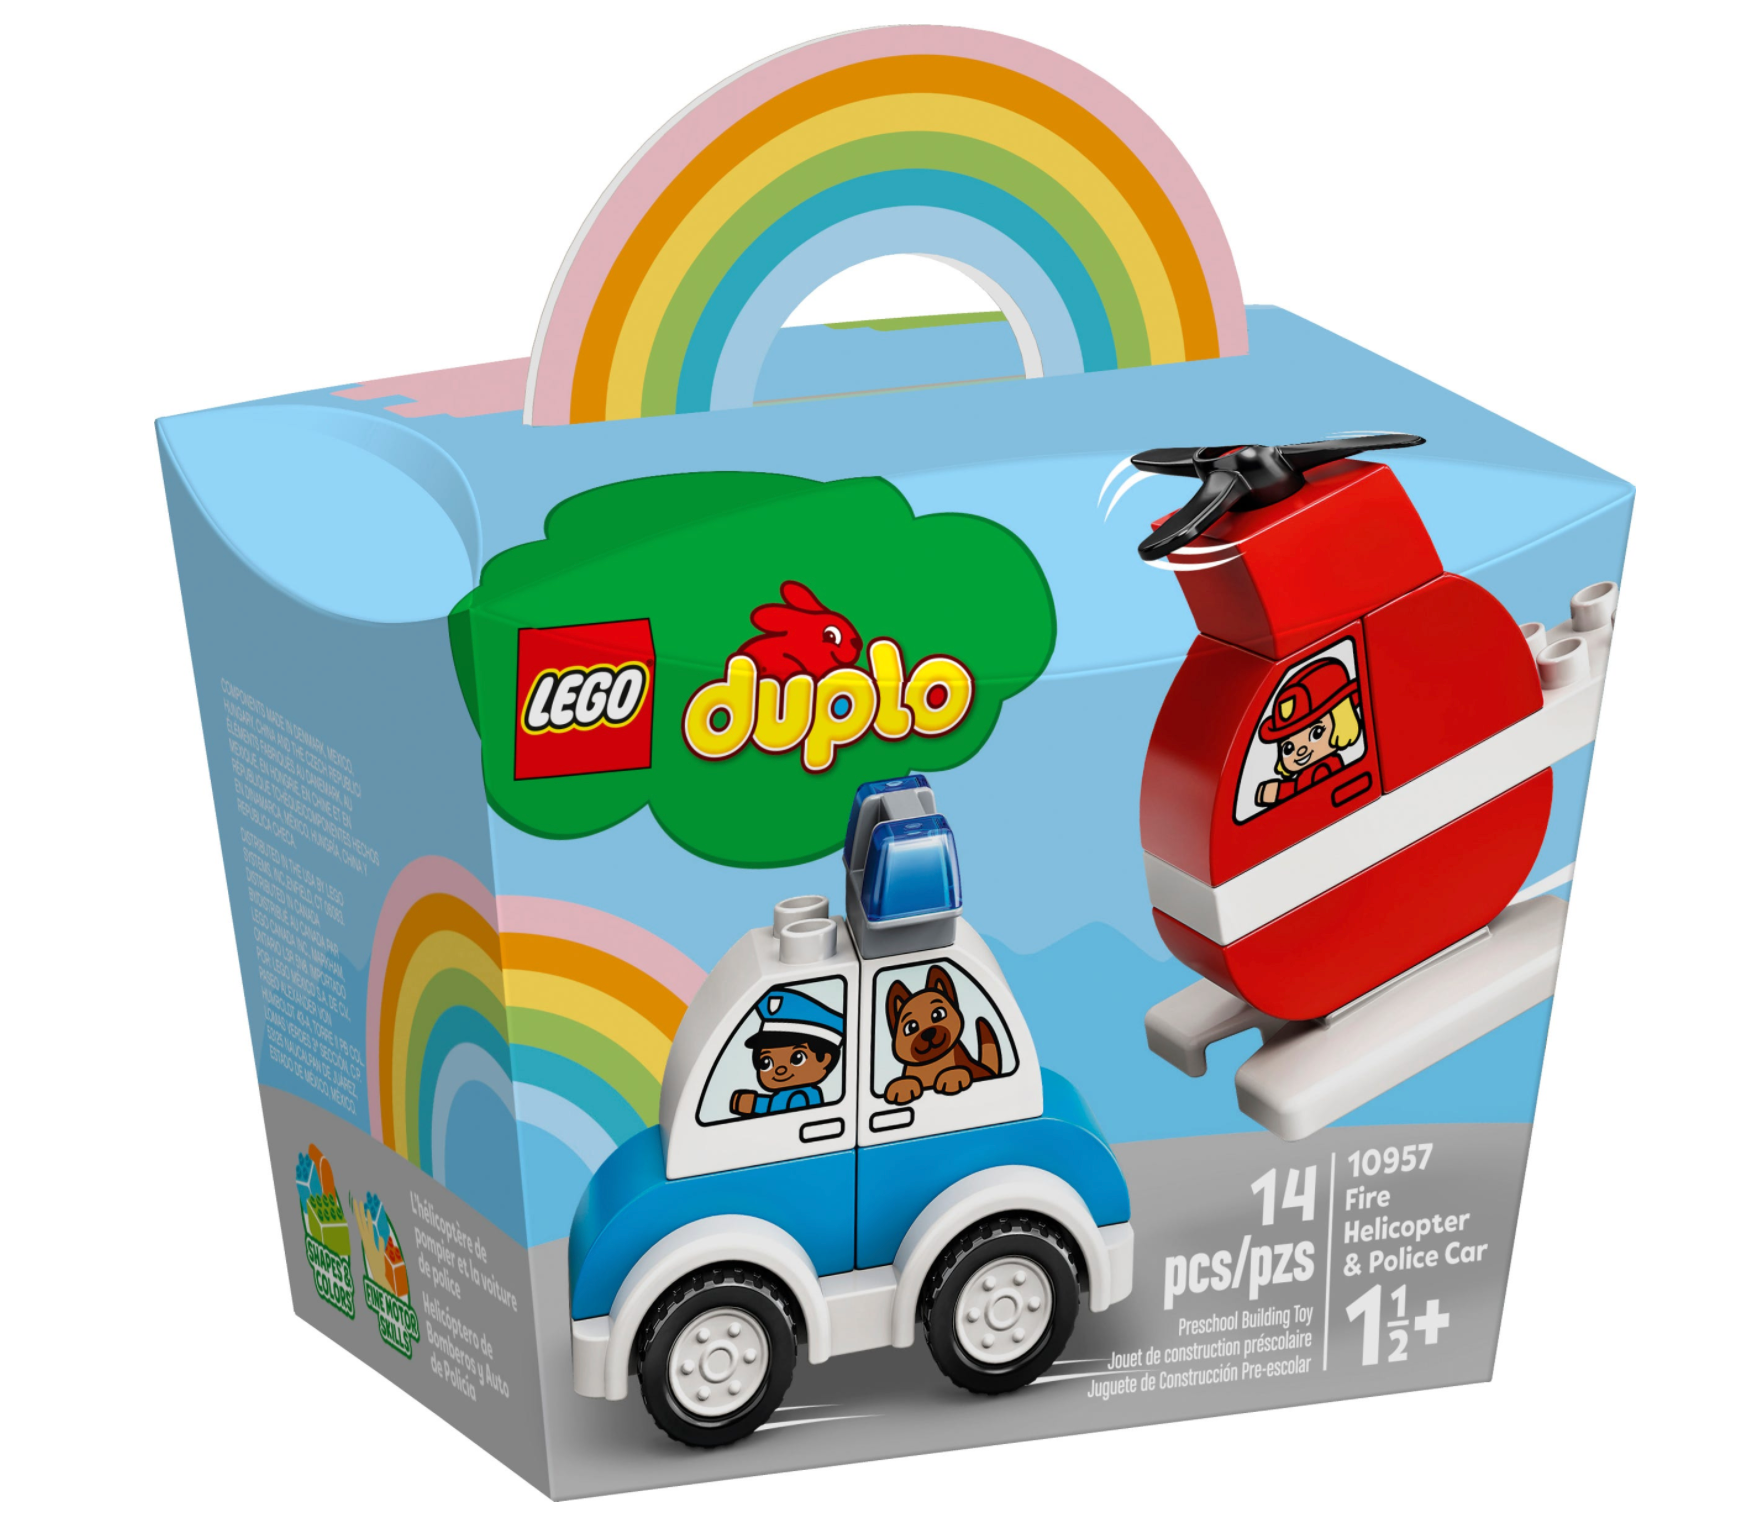 LEGO: DUPLO - Fire Helicopter & Police Car